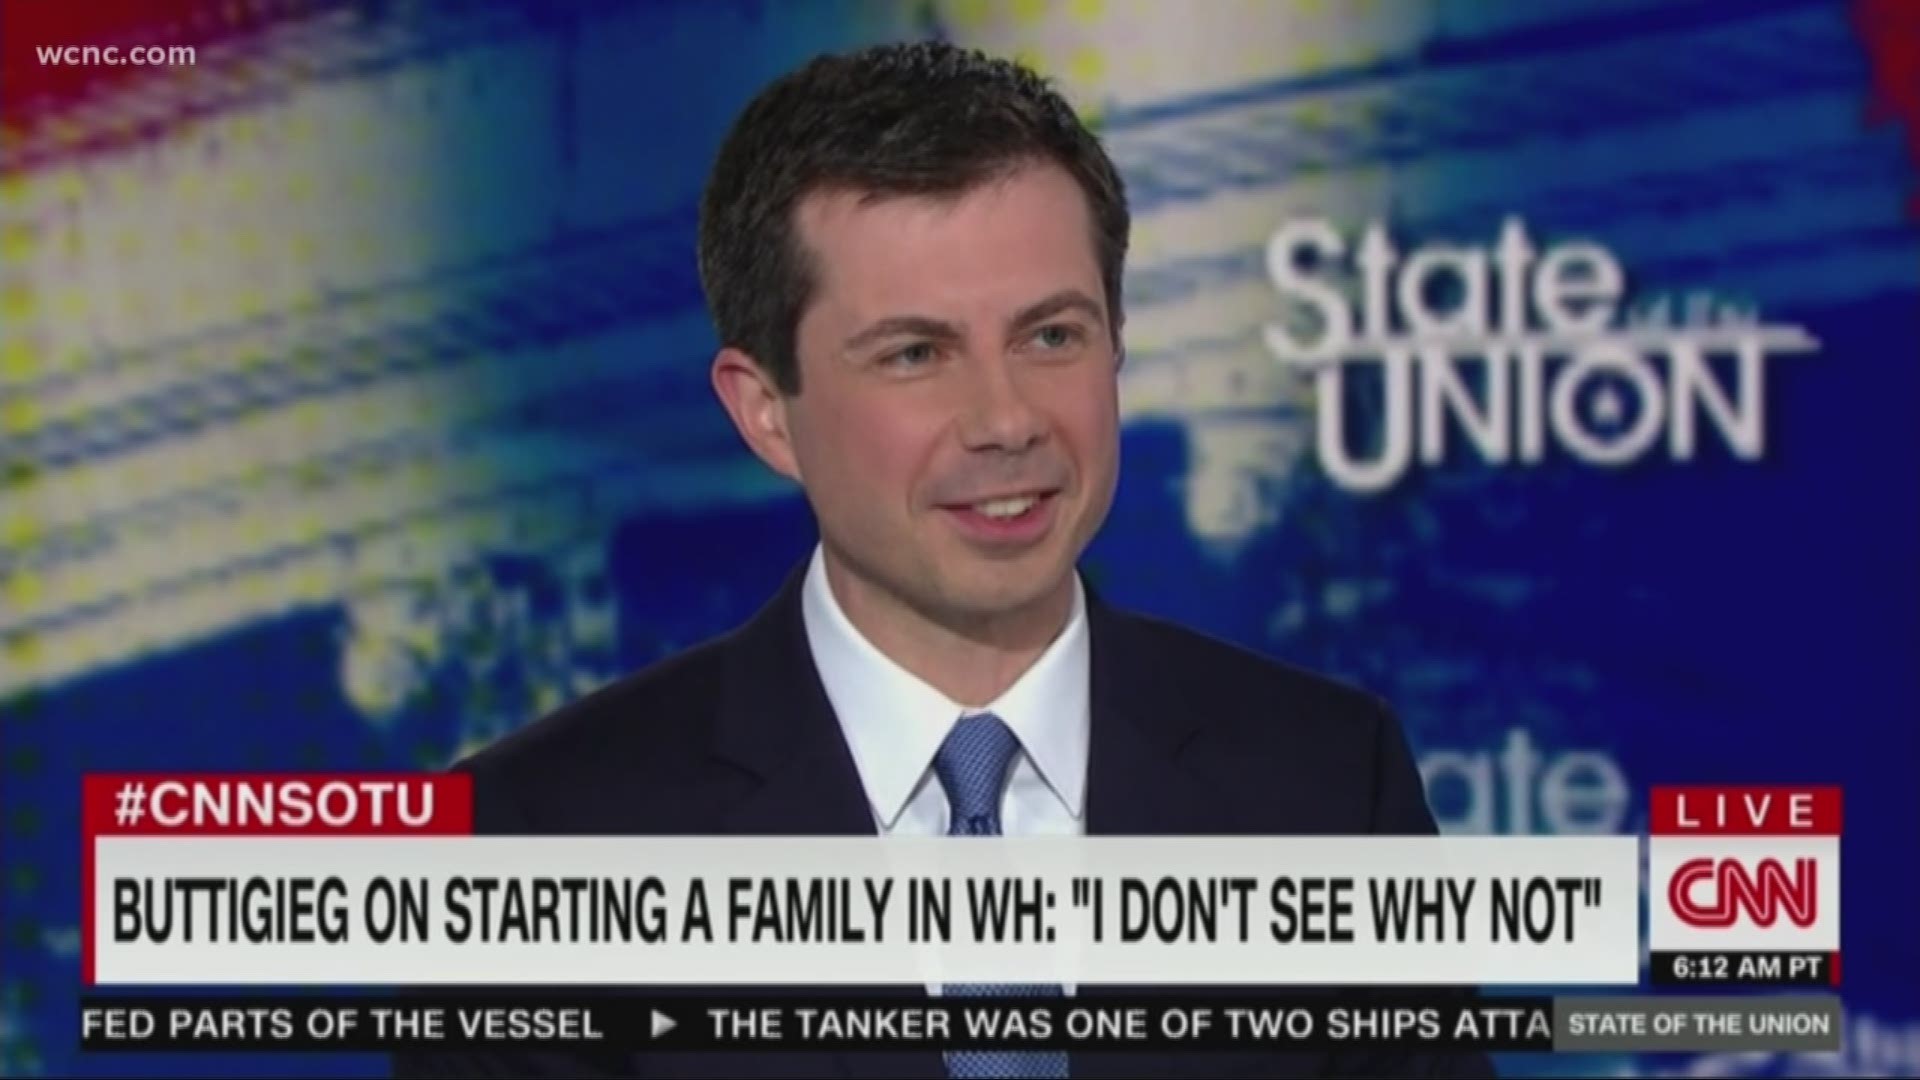 Democratic presidential hopeful Pete Buttigieg made headlines nationally after he said he'd want to start a family with his husband if elected to the White House.